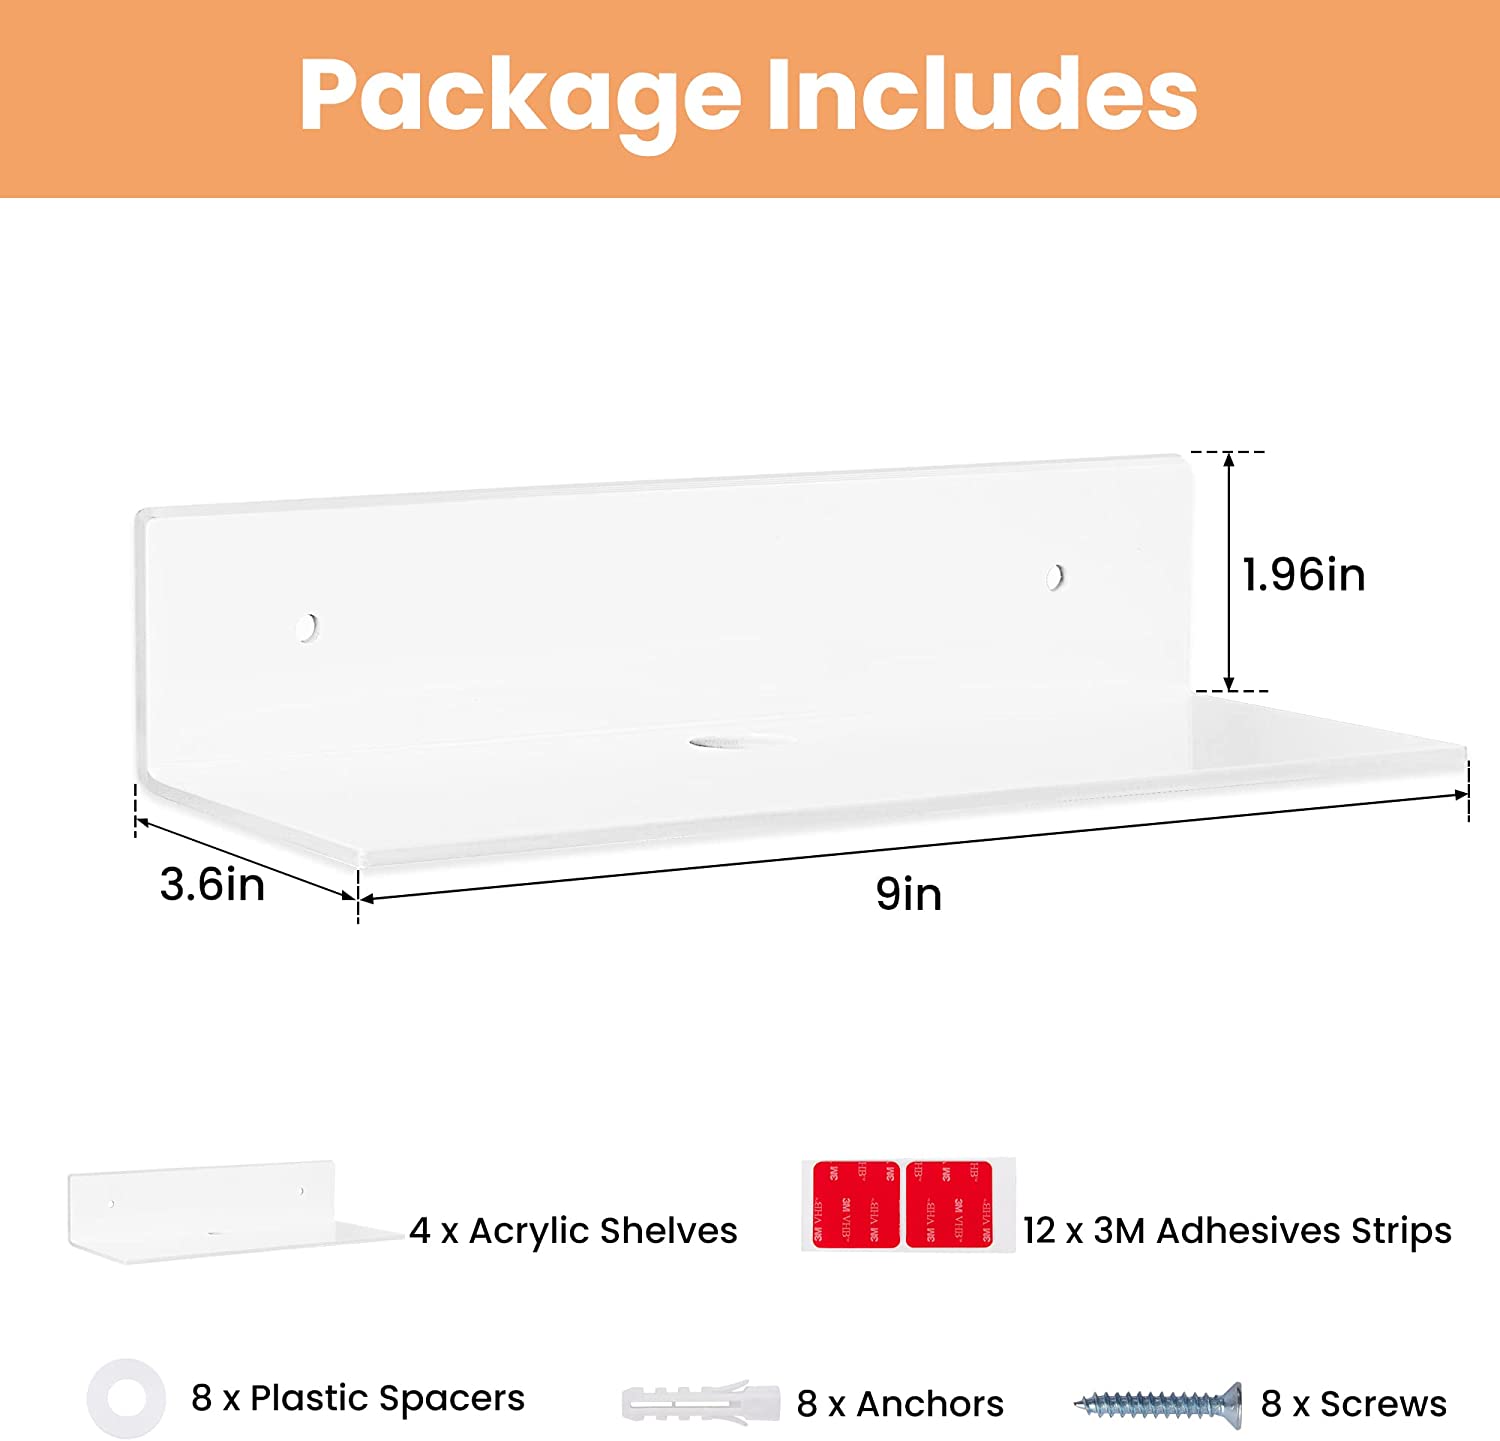 upsimples Clear Acrylic Shelves for Wall Storage, 15 Acrylic Floating –  Upsimples Direct